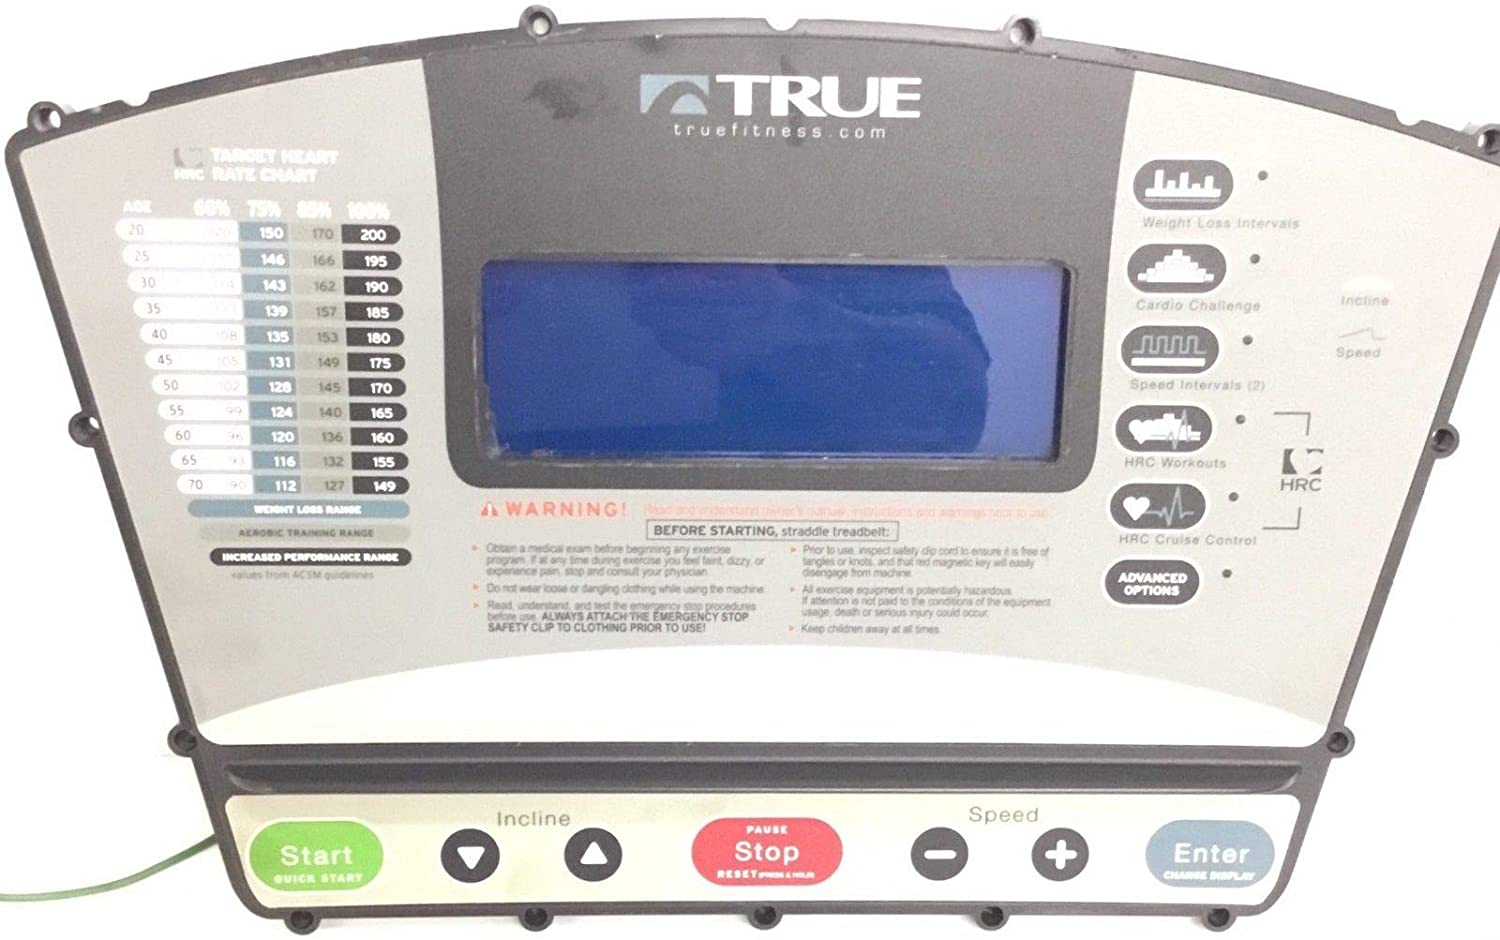 True Fitness Display Console Panel ASR-DGH7T-1E Works PS900 Treadmill (Used)